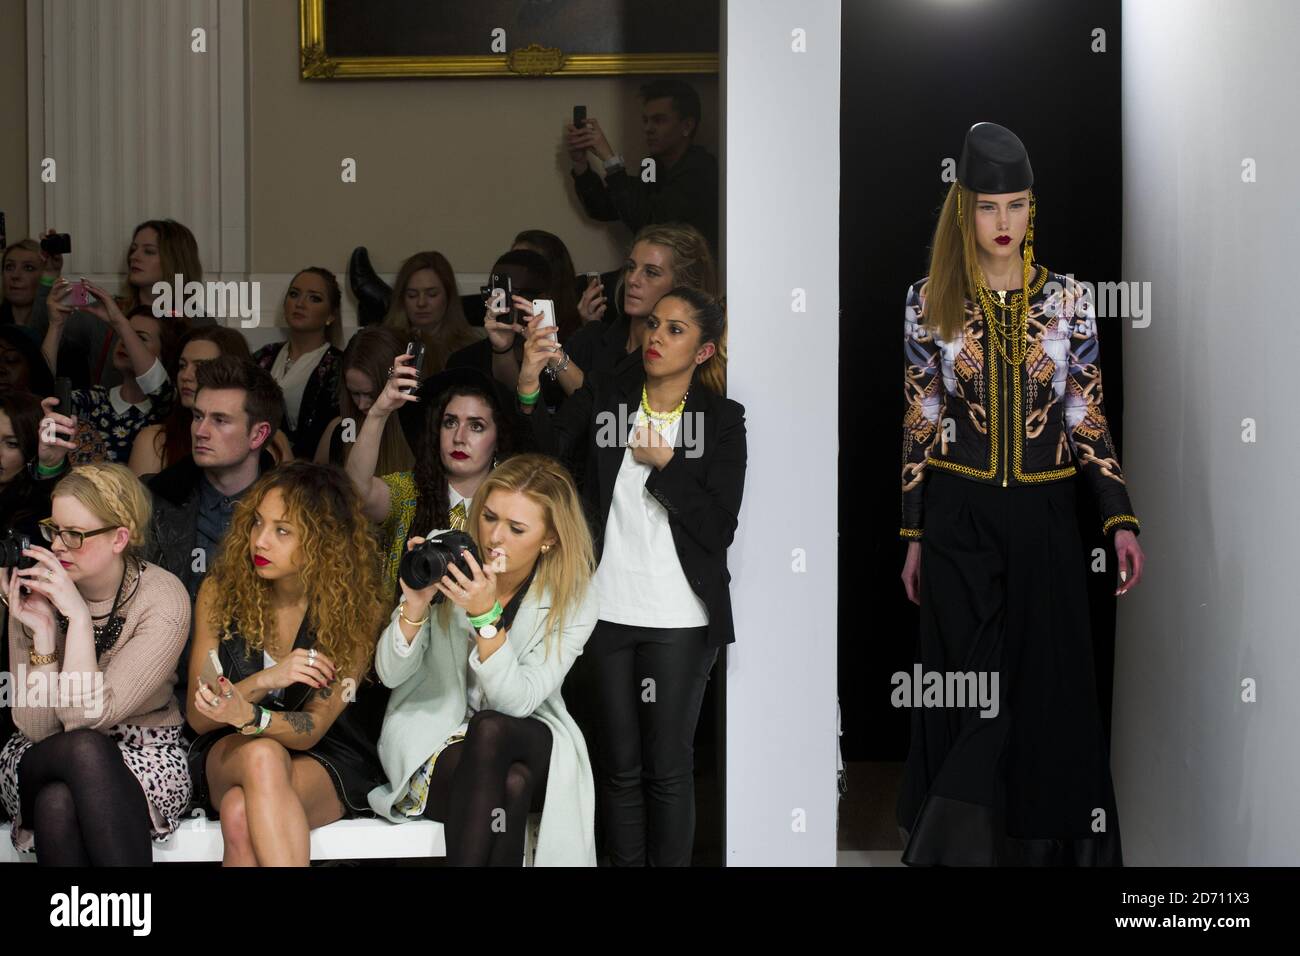 Models on the catwalk at the Belle Sauvage fashion show, at the Fashion Scout venue, at Freemasons Hall, as part of London Fashion Week 2014 Stock Photo